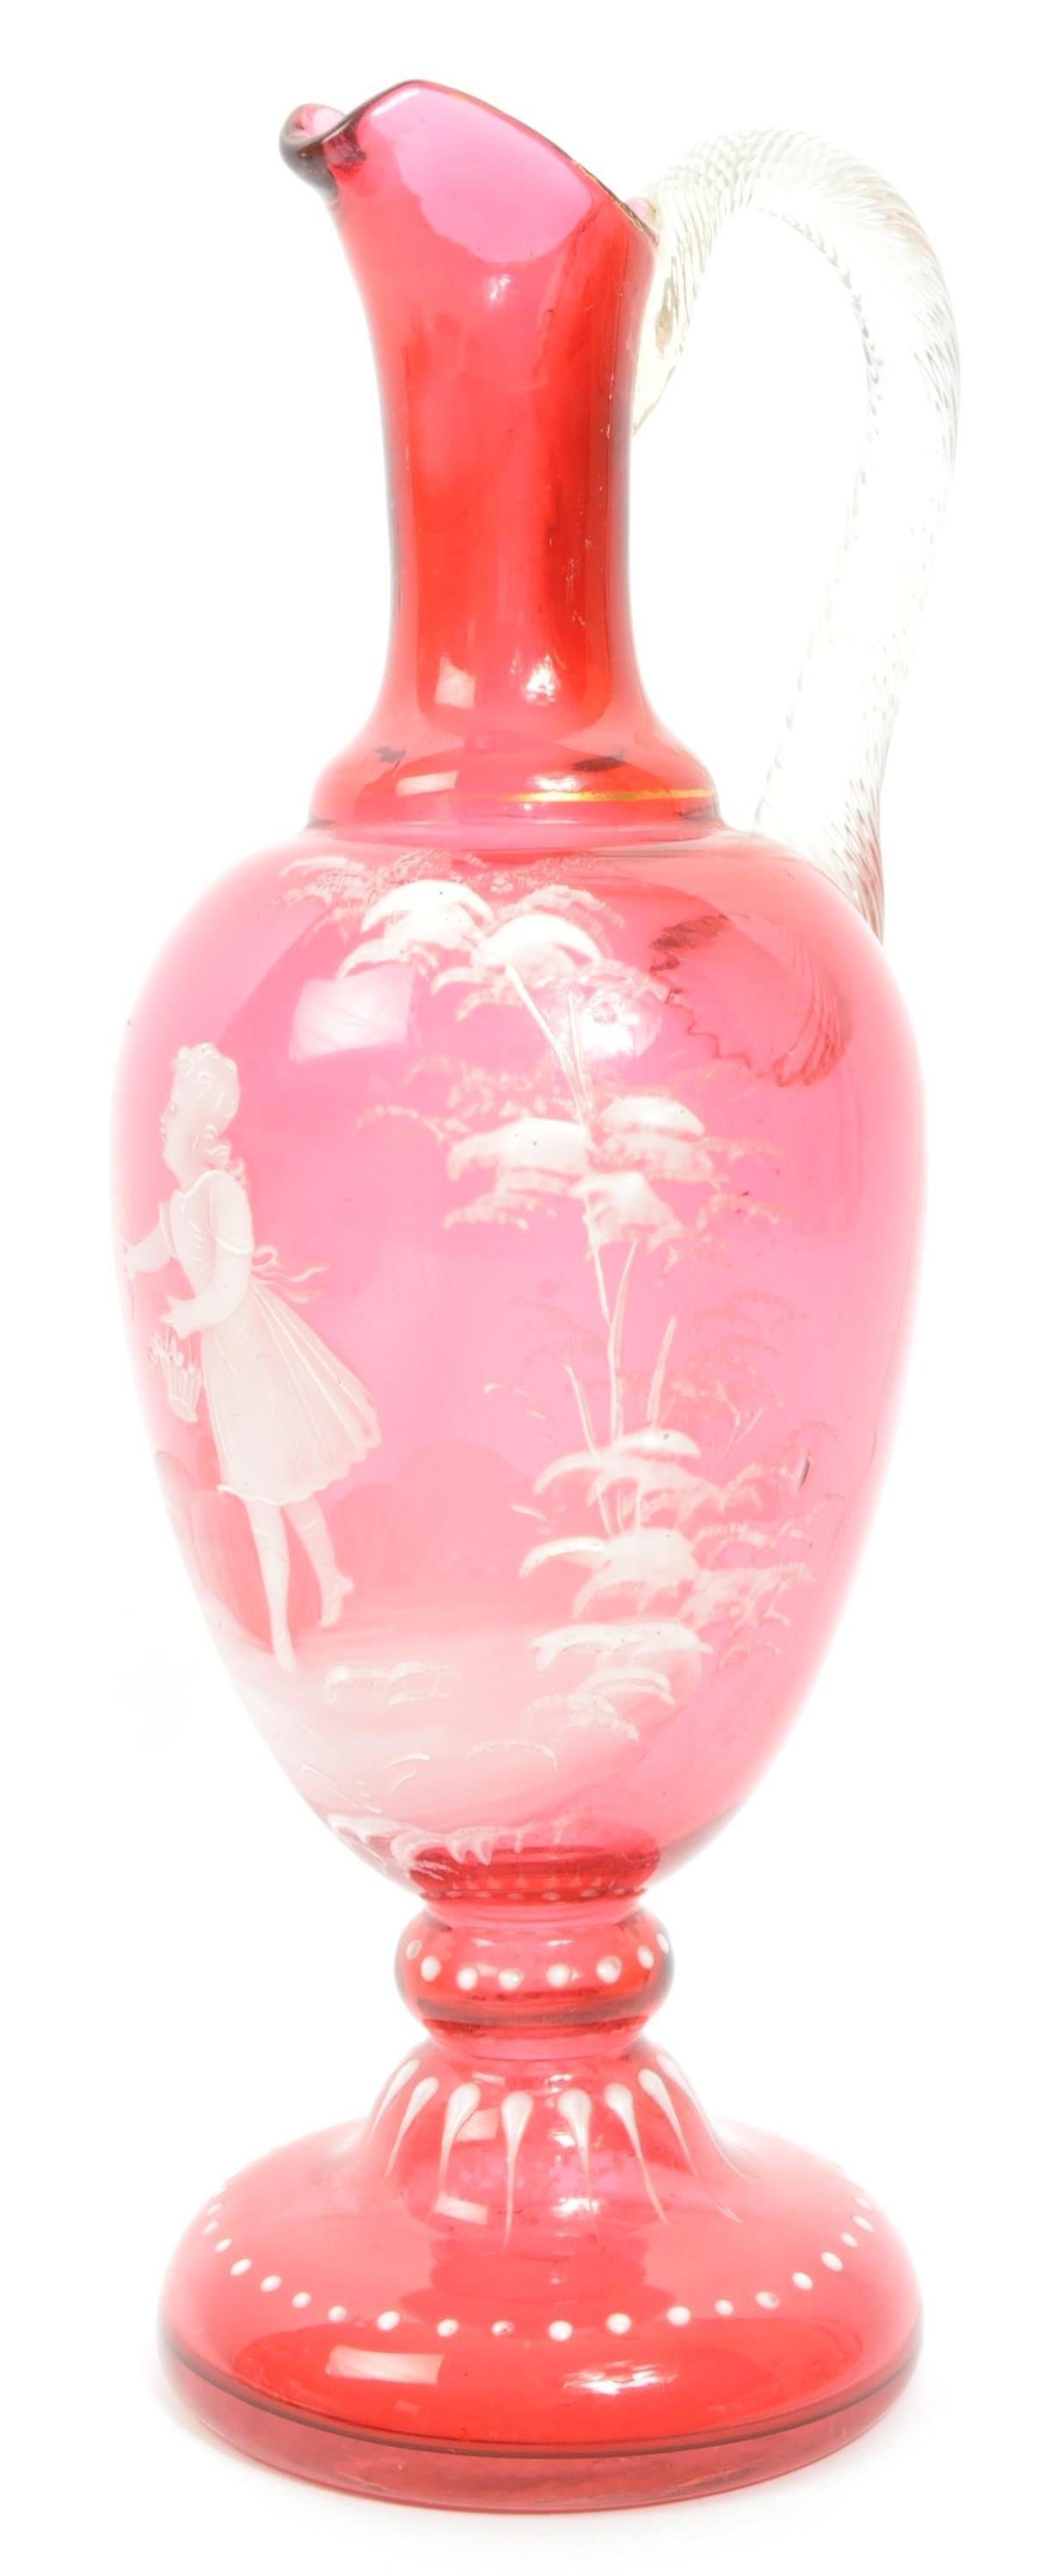 19TH CENTURY MARY GREGORY STYLE CRANBERRY GLASS - Image 3 of 5